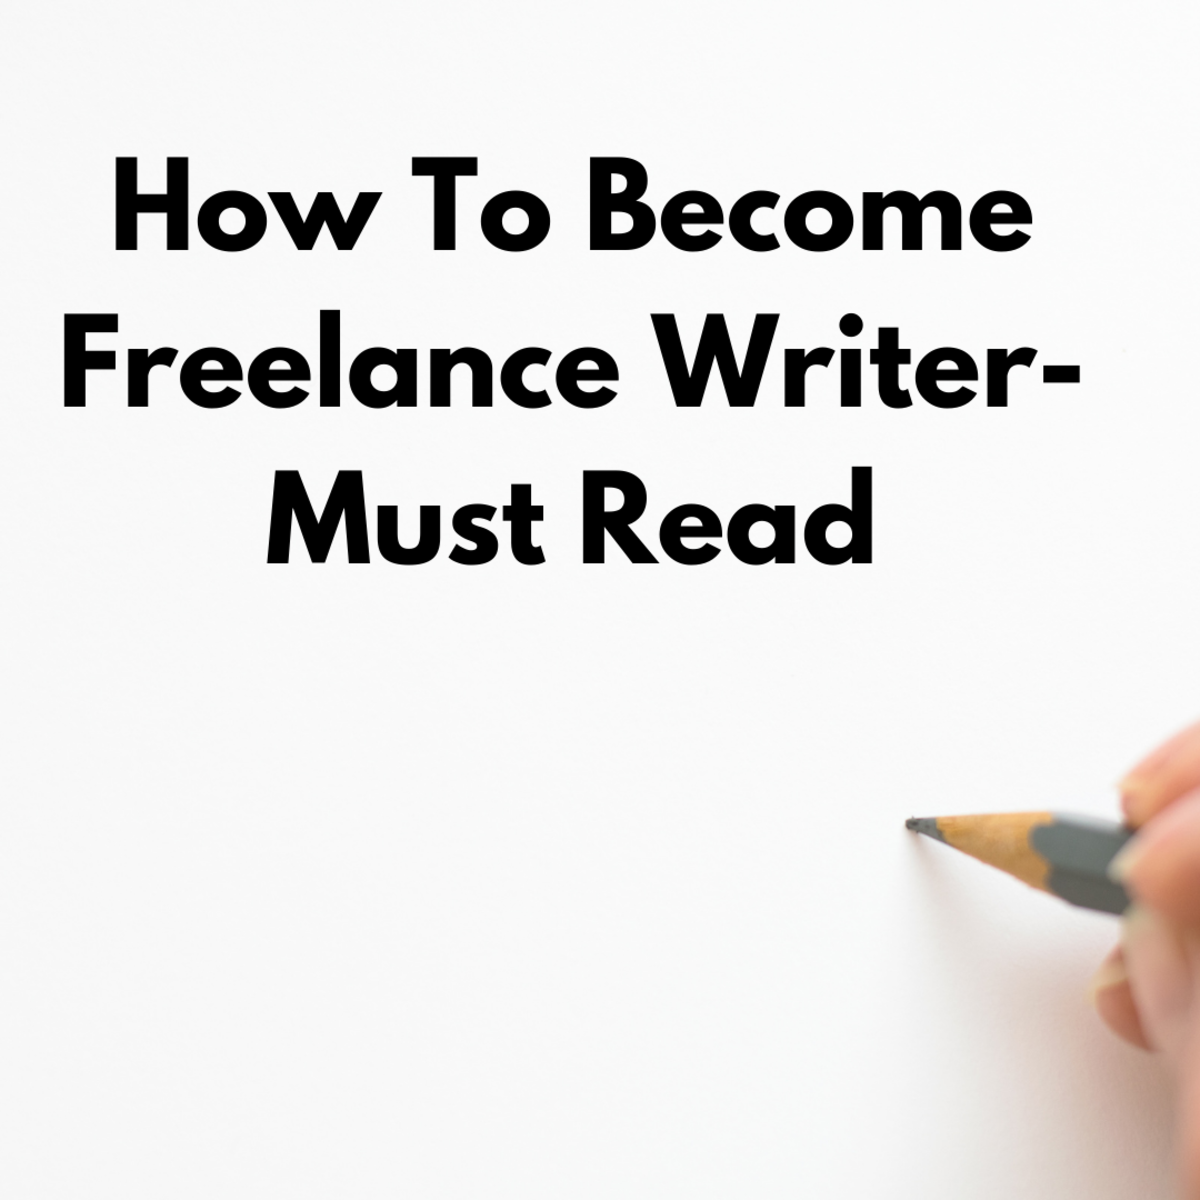 Steps One Should Consider To Become A Freelance Writer